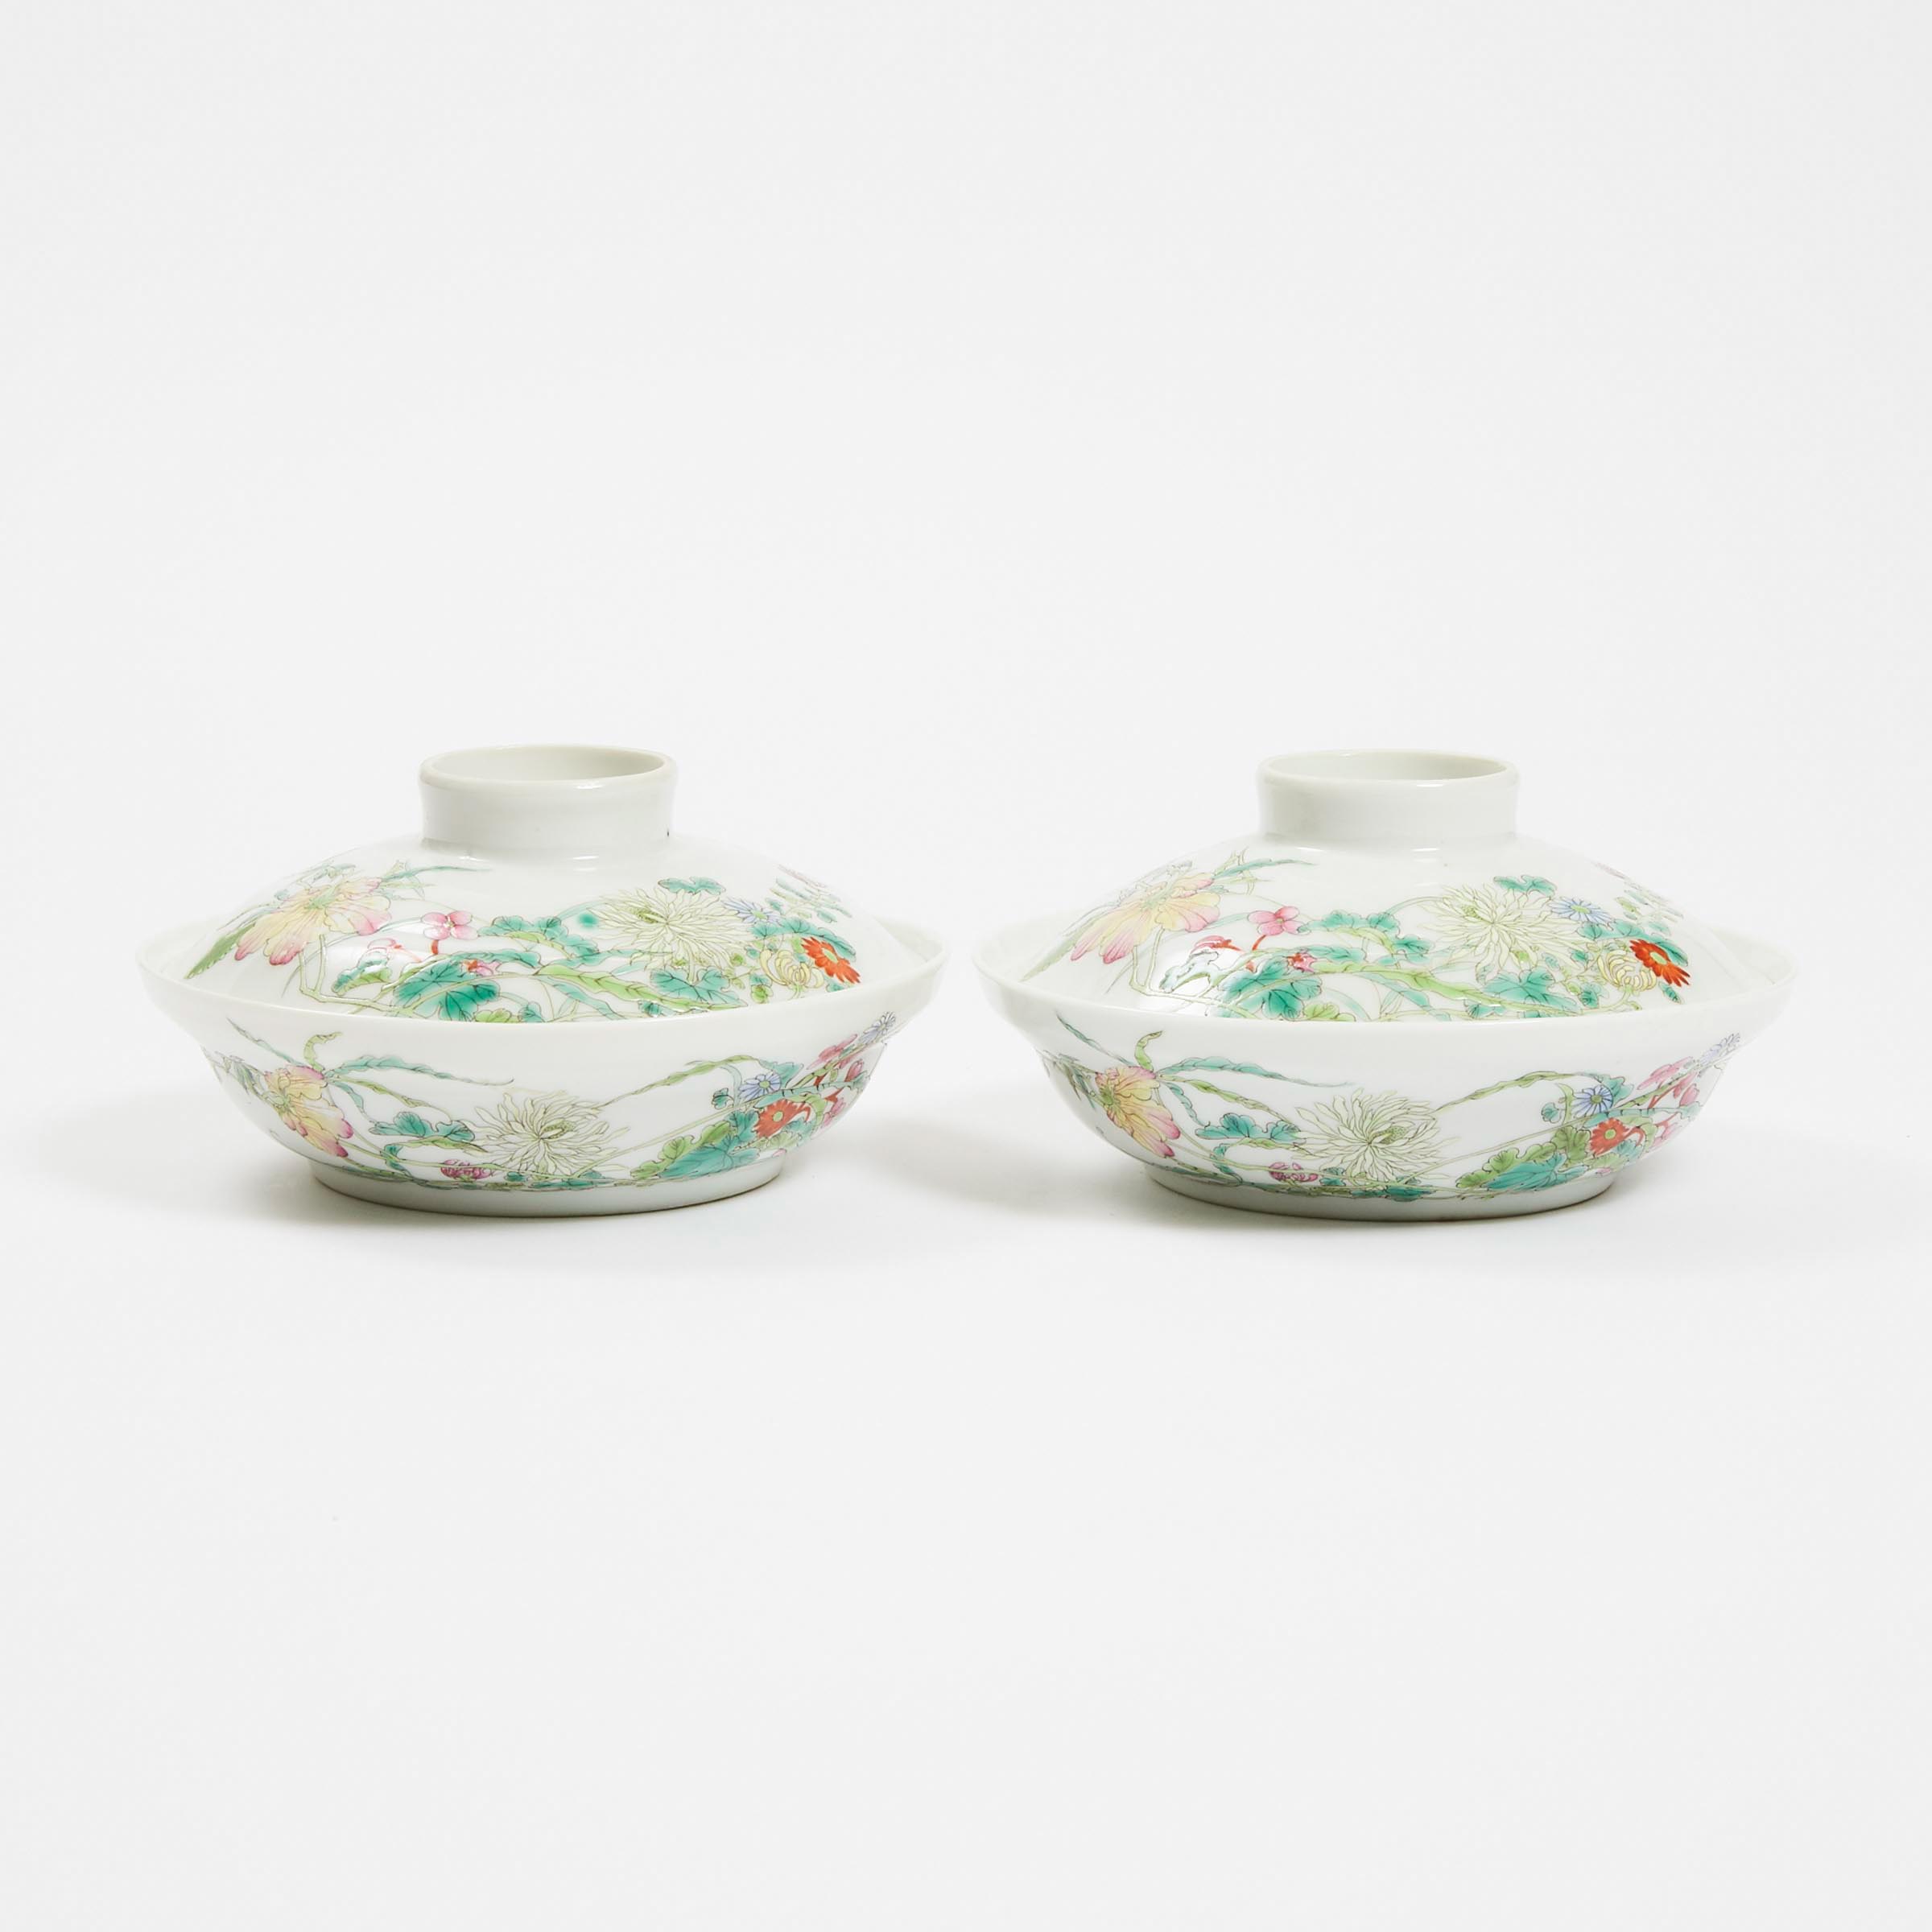 A Pair of Famille Rose Bowls and